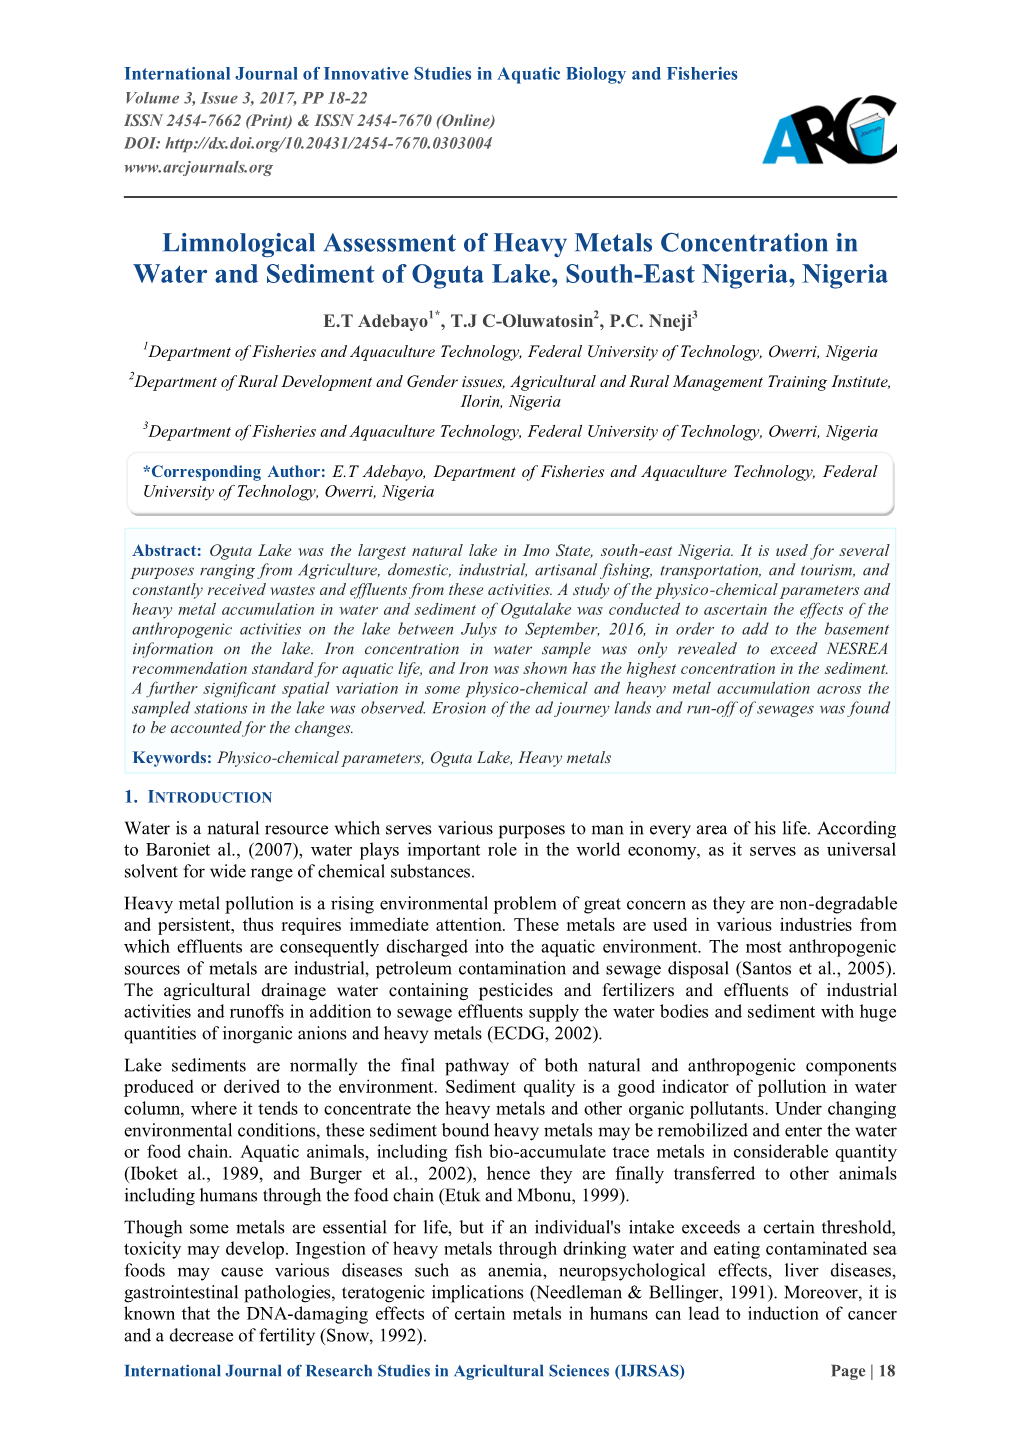 Limnological Assessment of Heavy Metals Concentration in Water and Sediment of Oguta Lake, South-East Nigeria, Nigeria